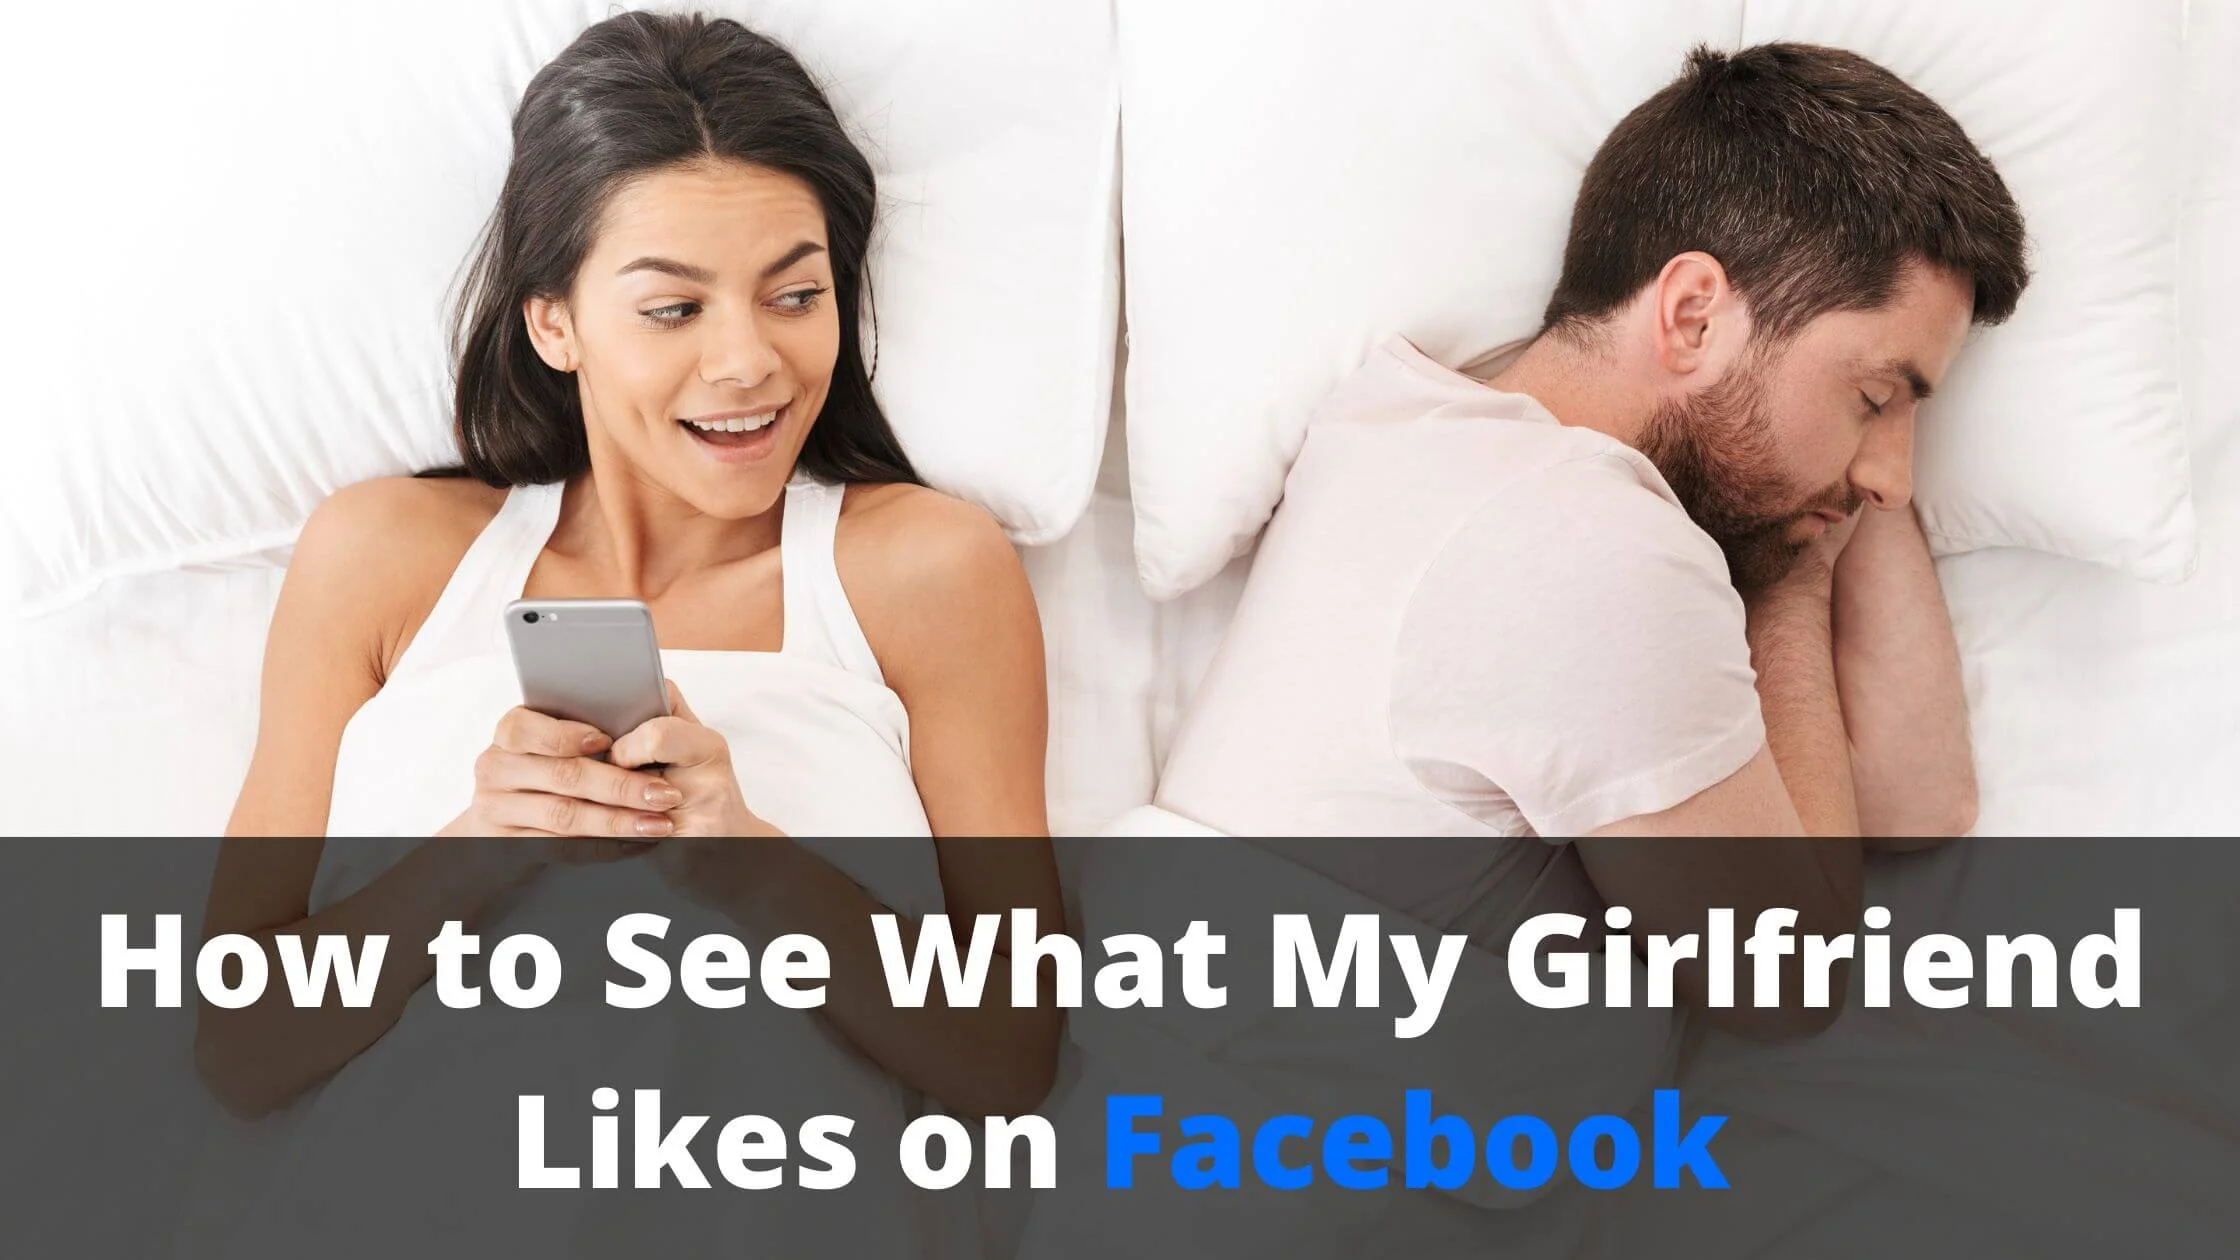 See What My Girlfriend Likes on Facebook